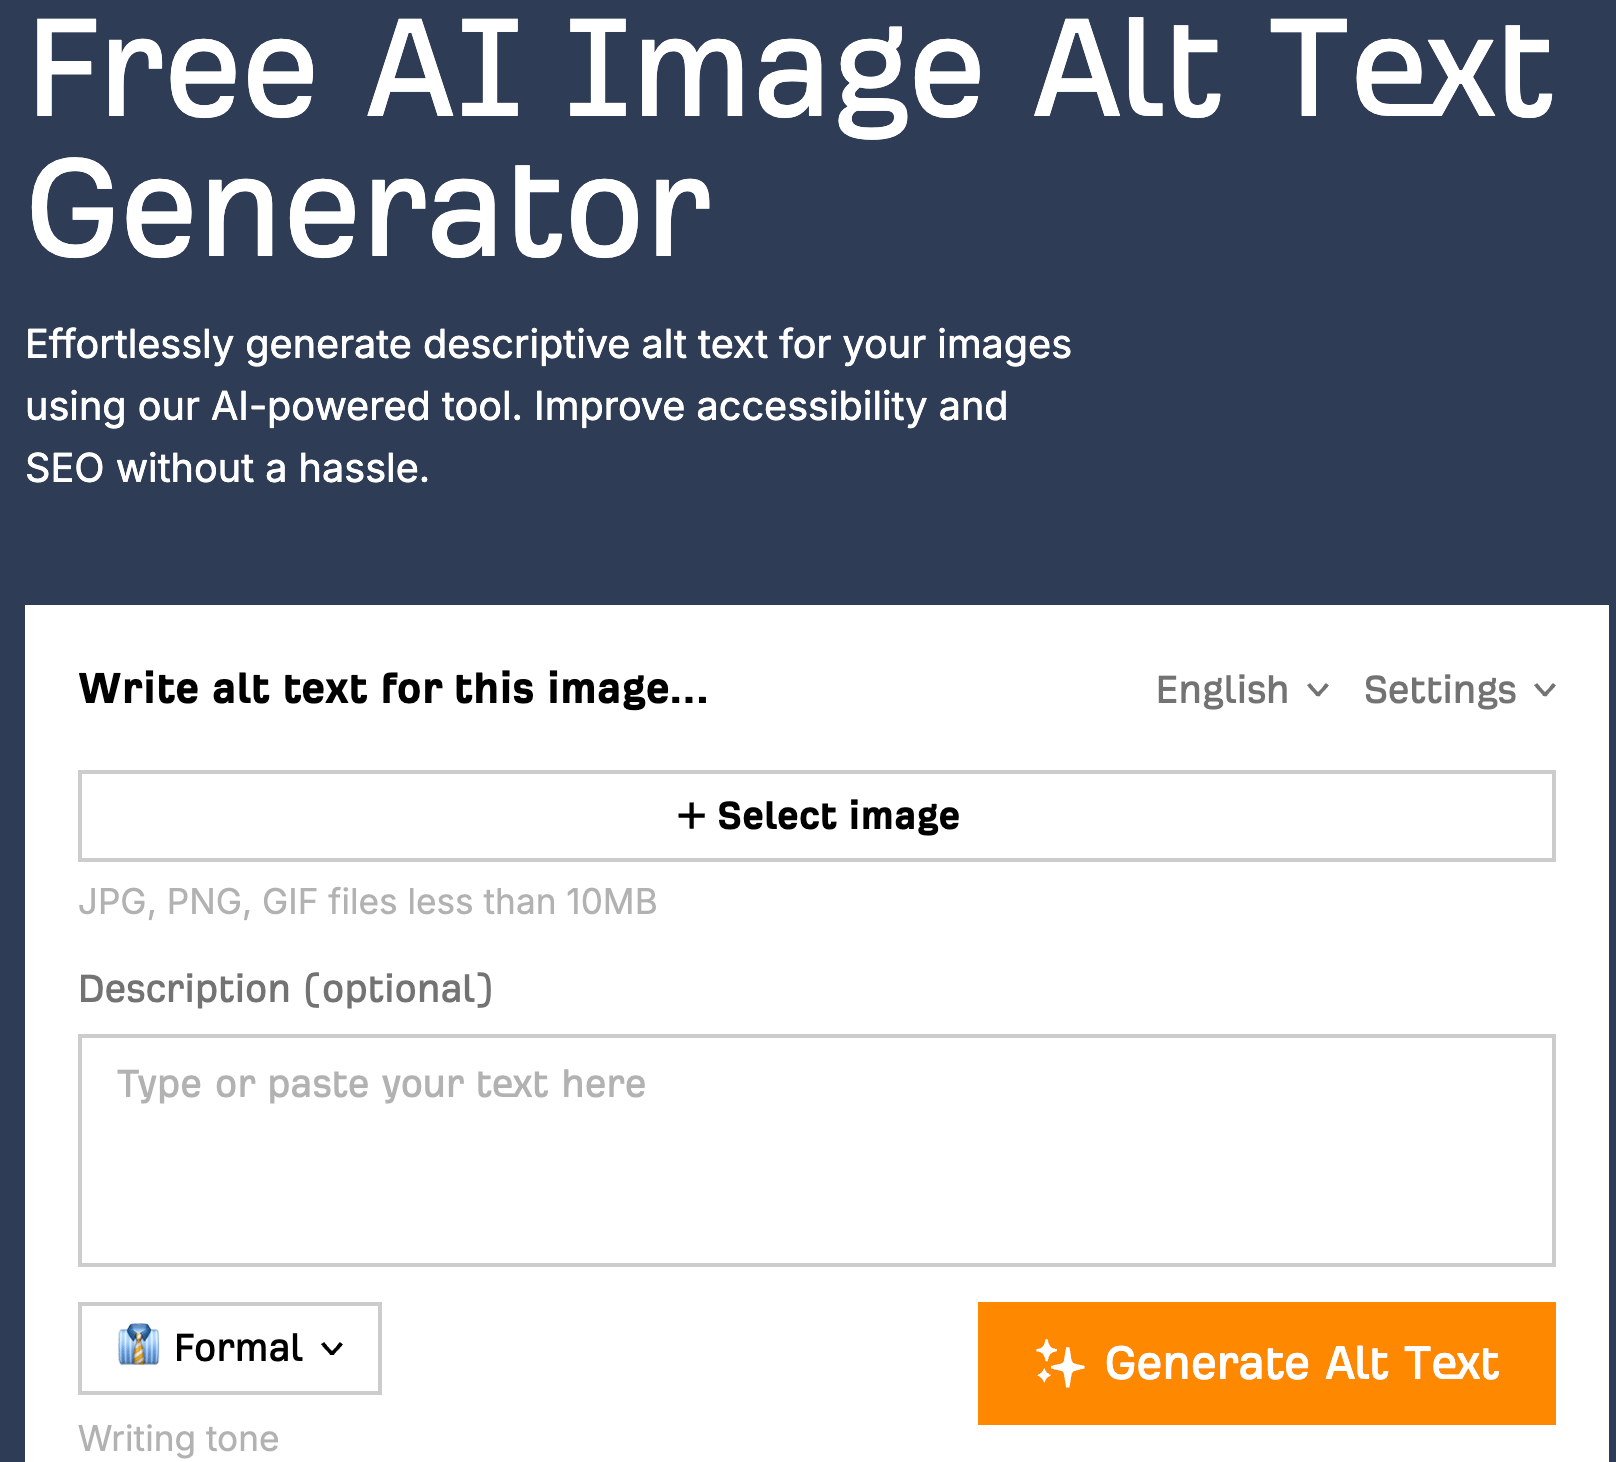 Our free AI image alt text generator